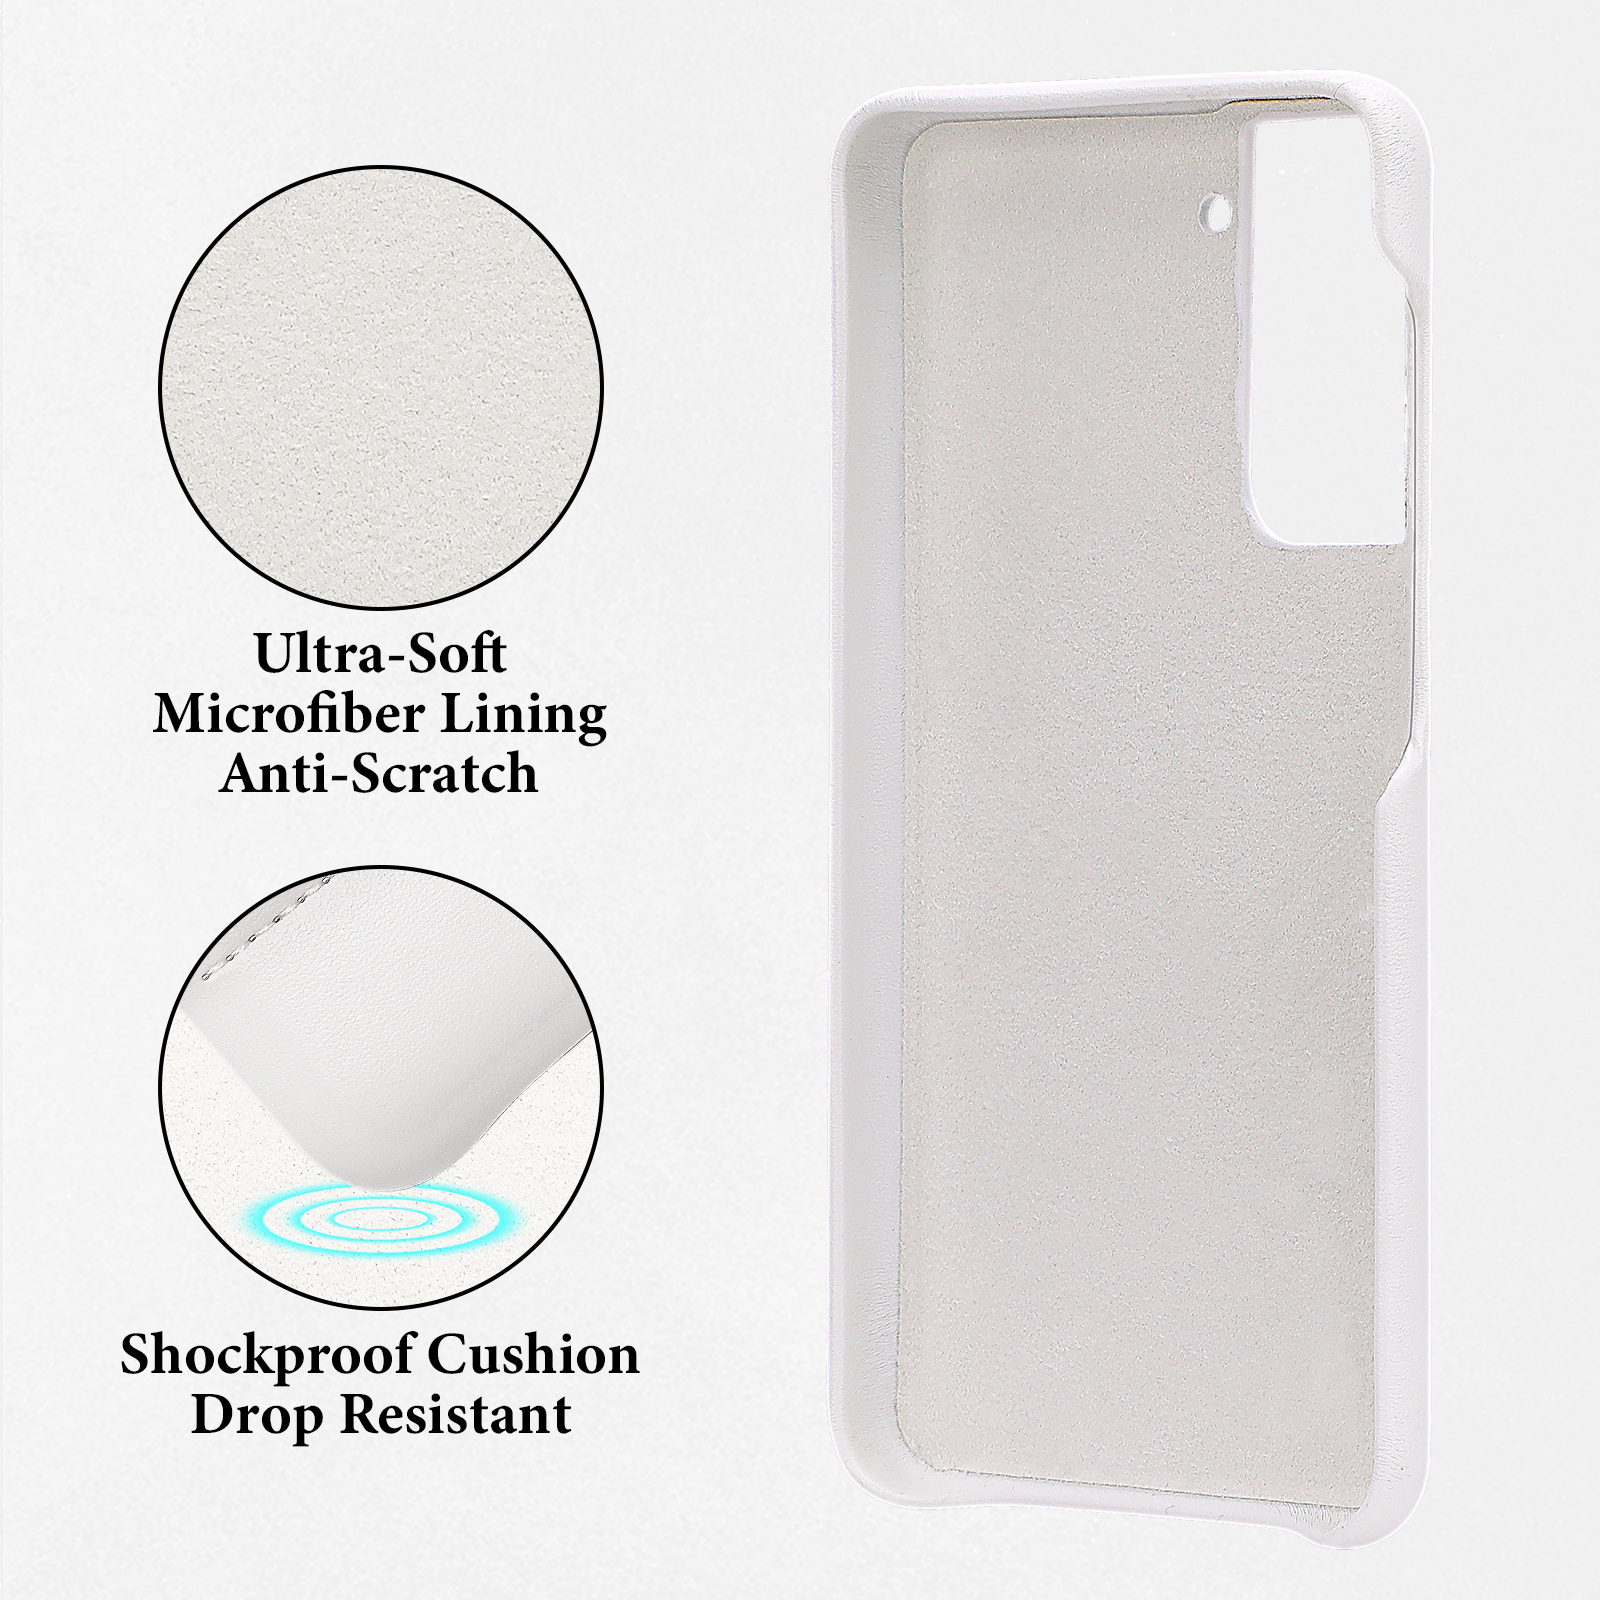 Hot Off for Samsung Galaxy S21 Ultra Case, Nappa Leather Puffer Phone Case Galaxy S21 Ultra Case [Full Body Protection] [Non-Slip] Shockproof Protective Phone Case, White for Galaxy S21 Ultra - image 4 of 5